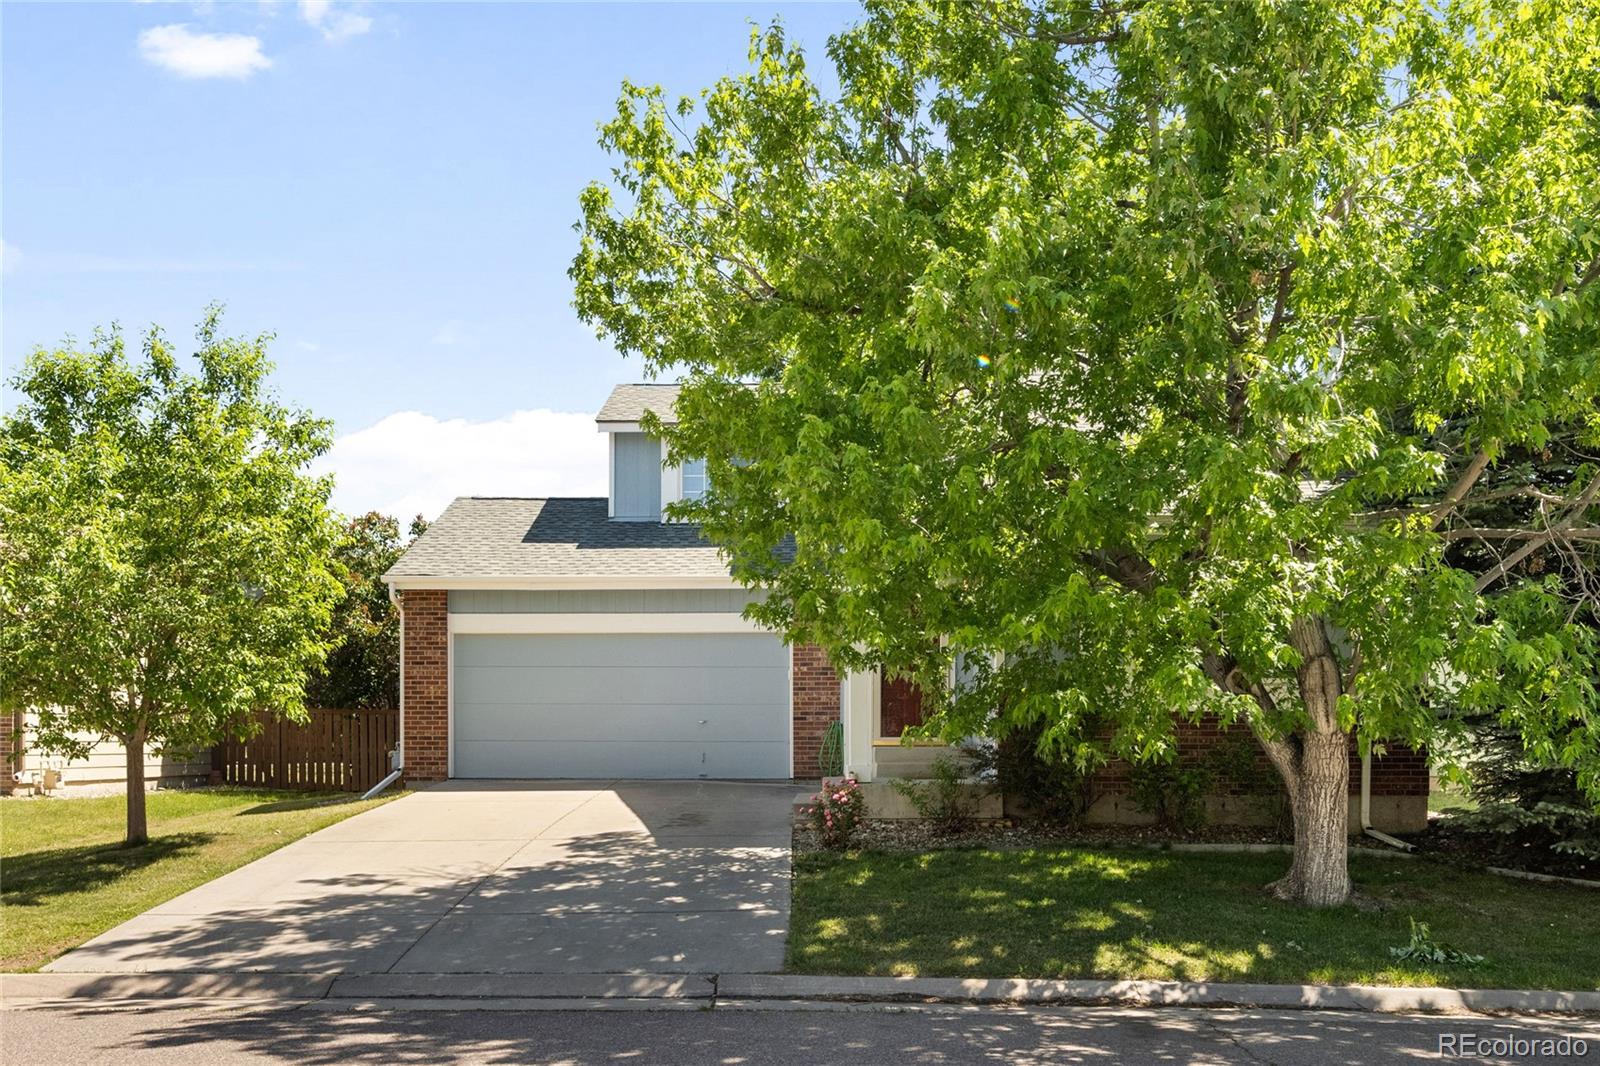 1146  Cherry Blossom Court, highlands ranch MLS: 7318642 Beds: 4 Baths: 2 Price: $549,900